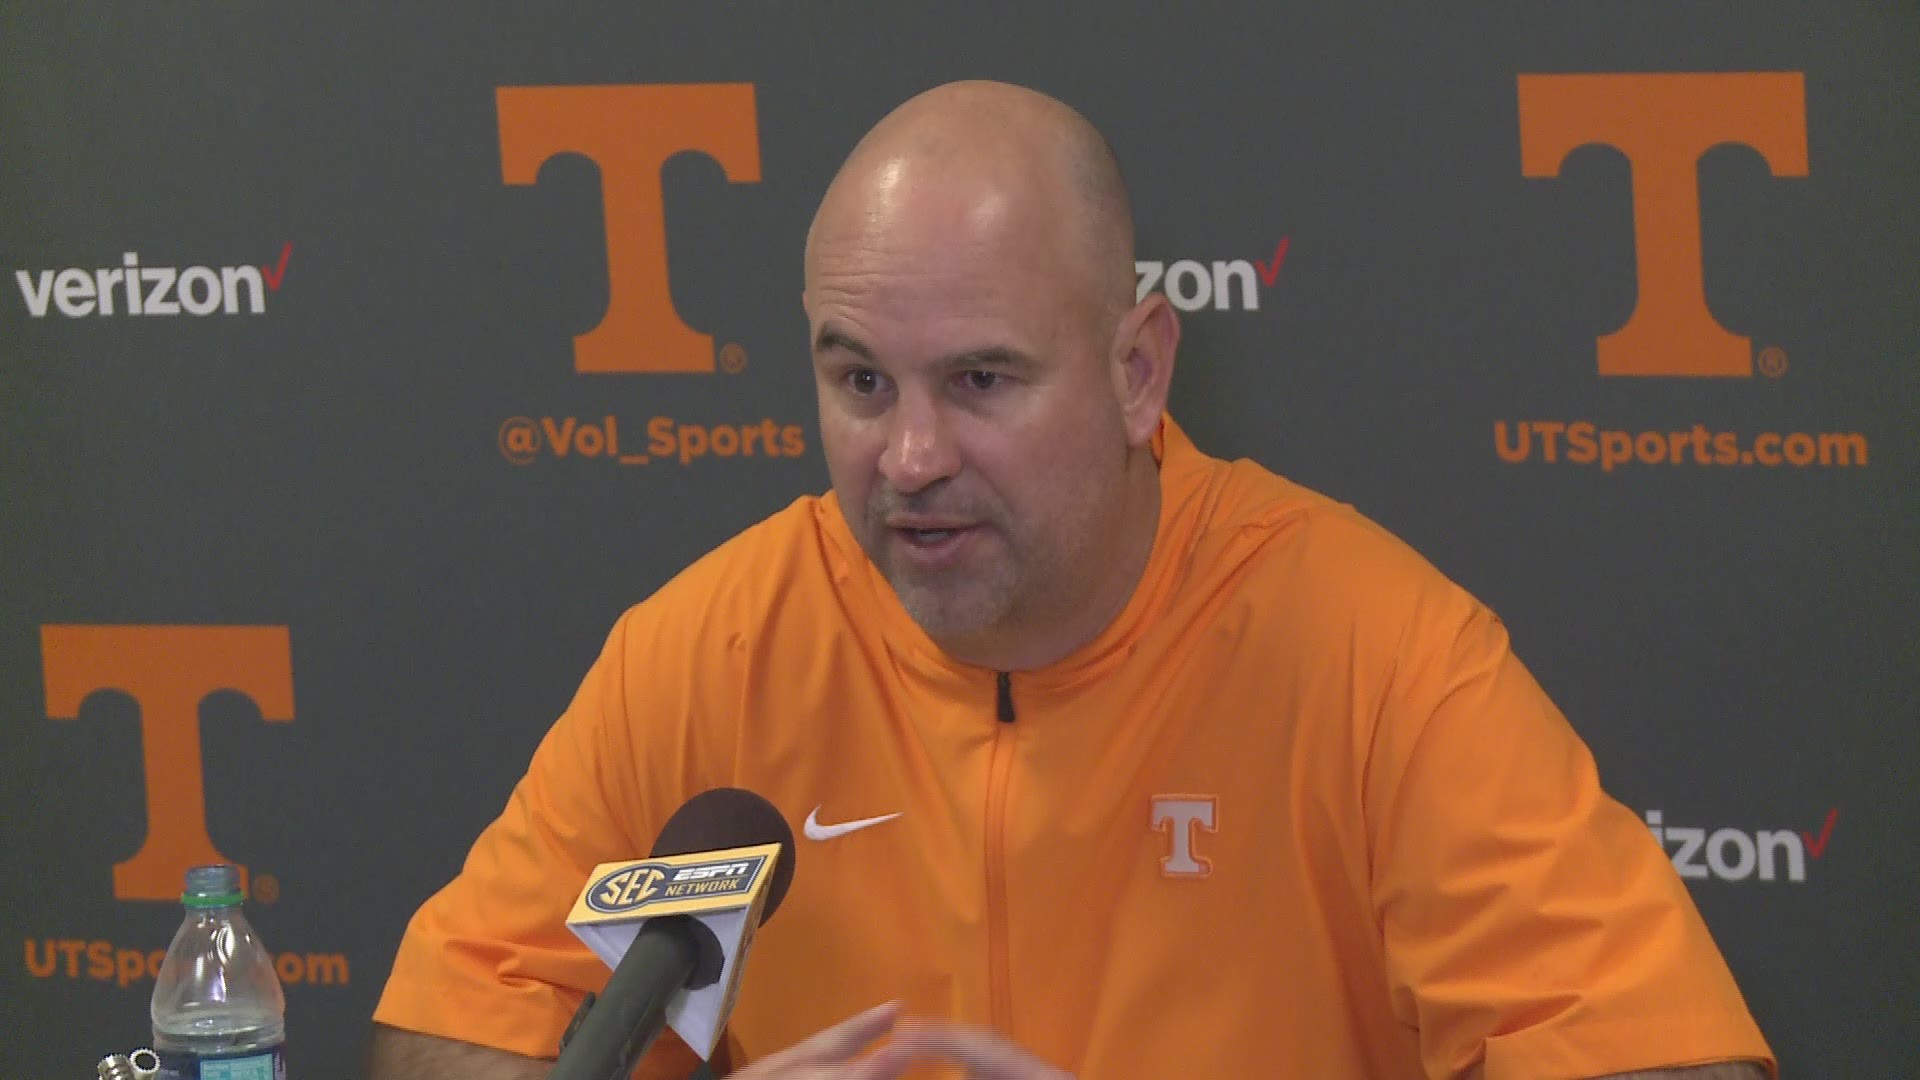 Jeremy Pruitt's thoughts on the Vols 38-13 loss to Vanderbilt in the final game of his first season as head coach.